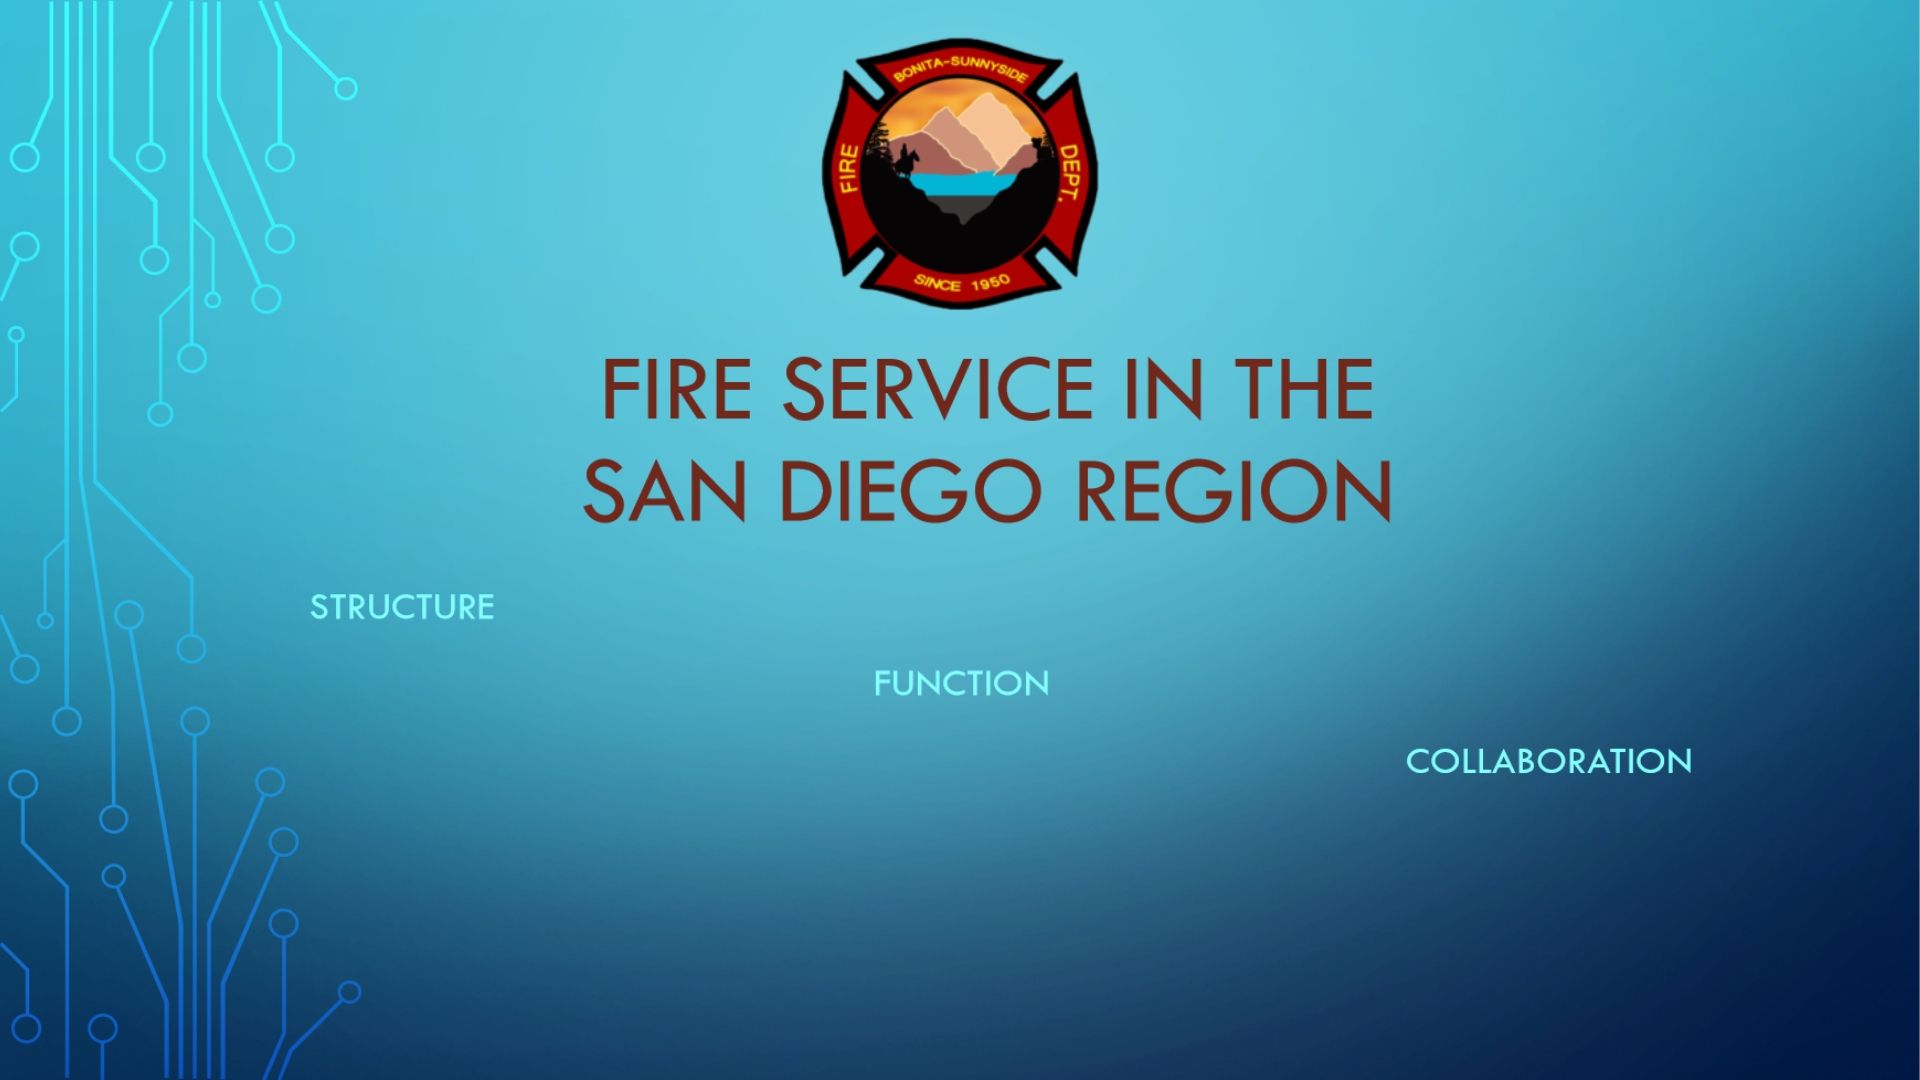 Learn about fire service in the San Diego region through this Fire Chief PowerPoint presentation.